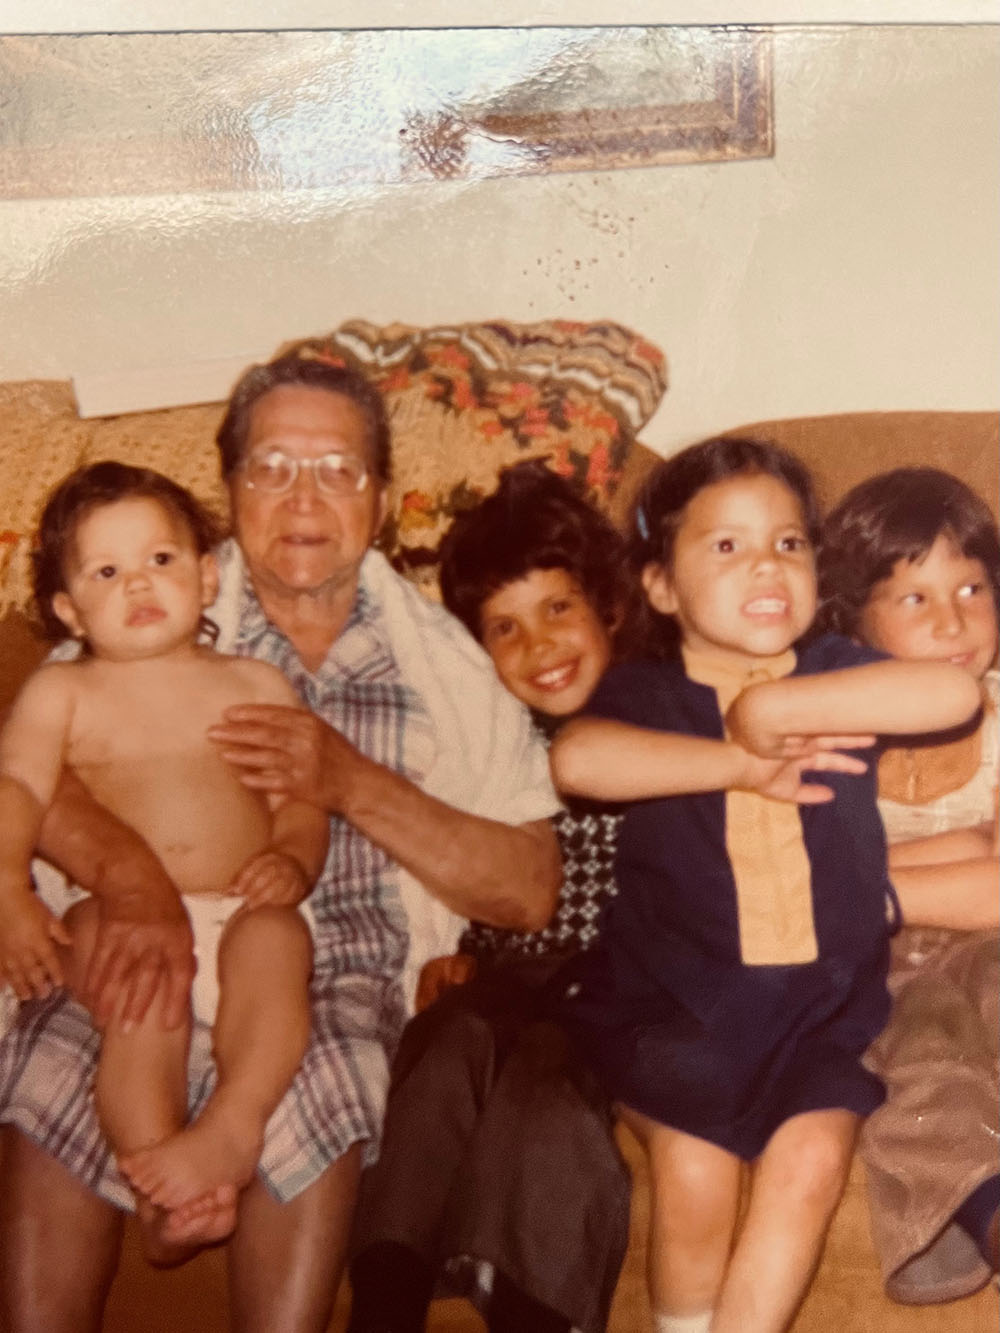 Photo of older woman with a little boy on her lap, next to three other children